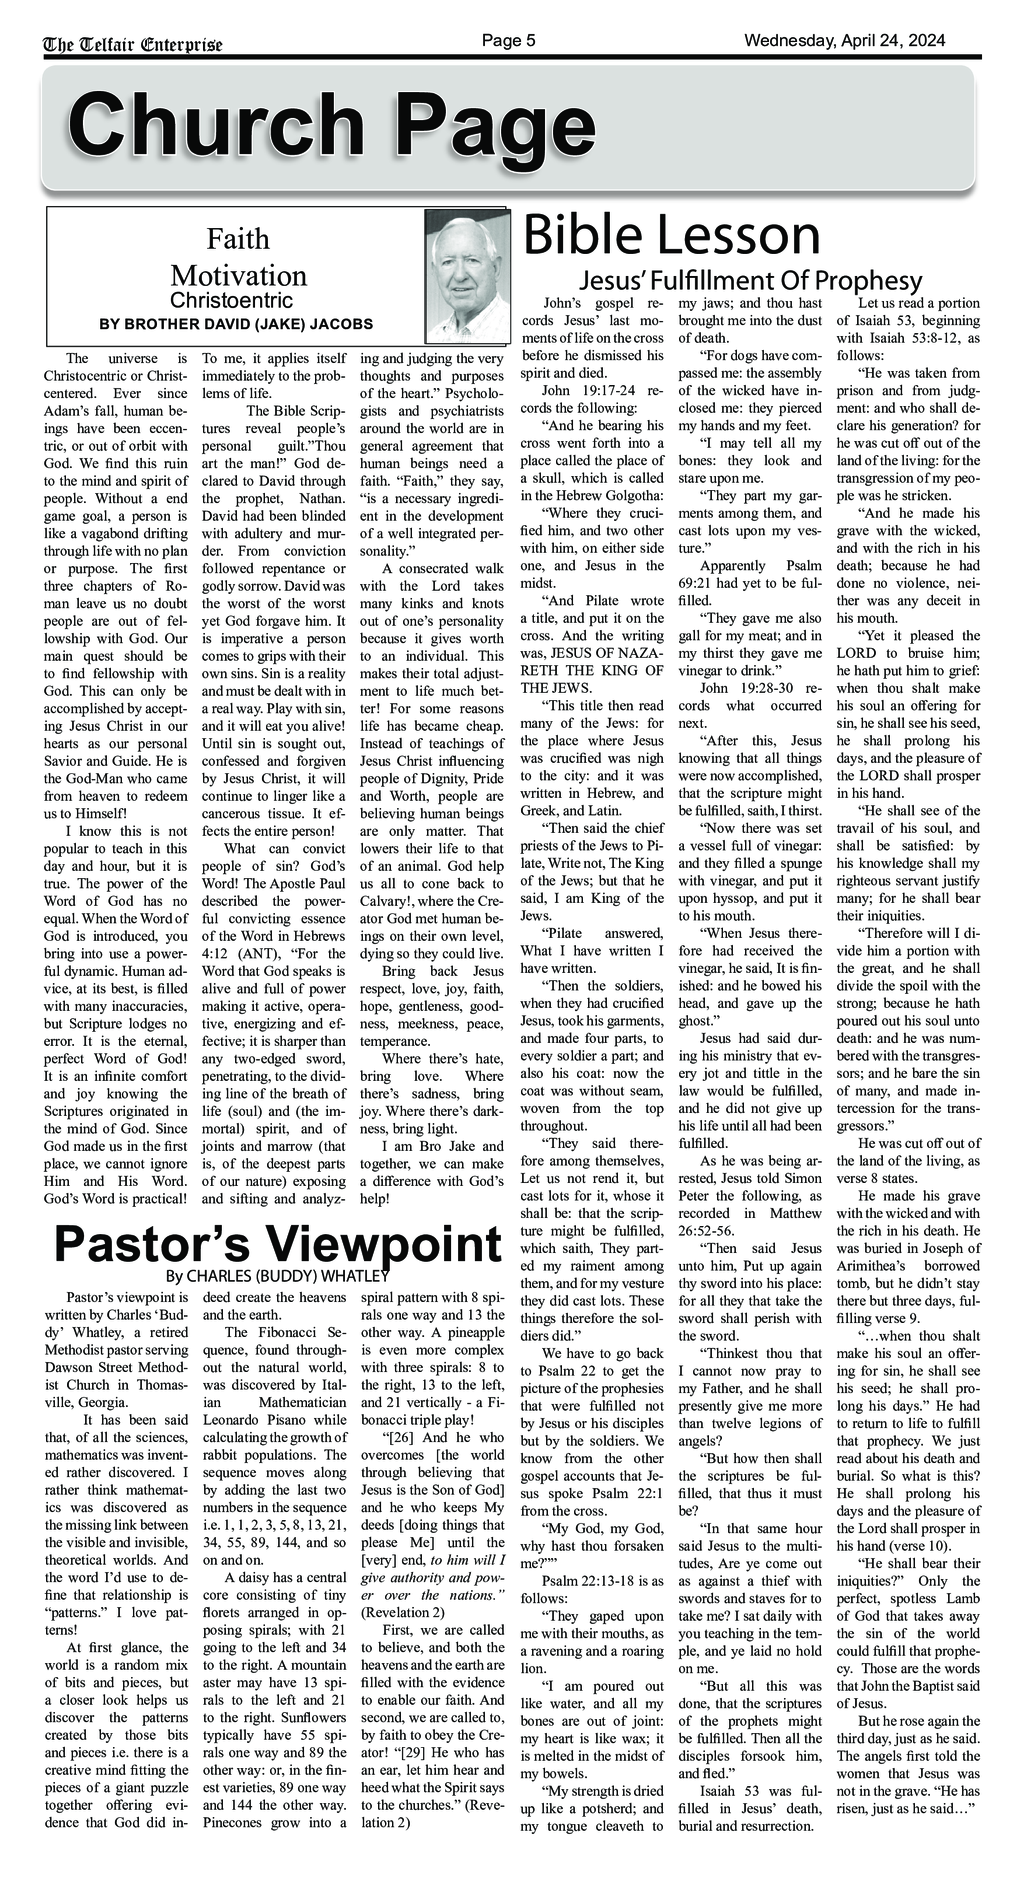 A newspaper article about a bible lesson and pastor 's viewpoint.